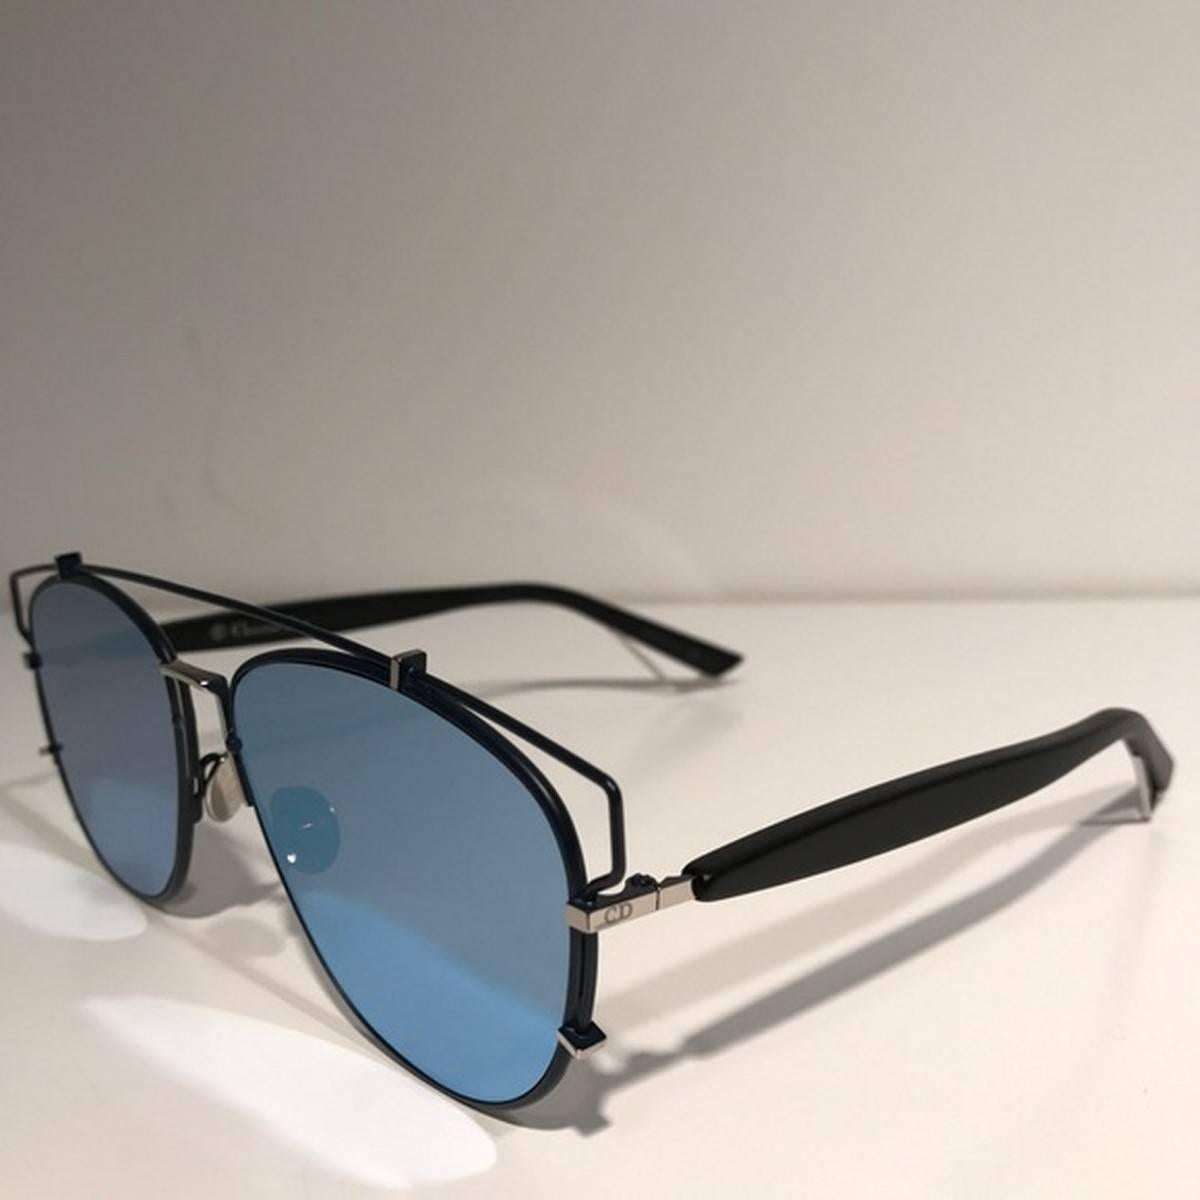 Dior Blue Mirrored Technologic Sunglasses
Color: Blue
Size: OS

Brand new with box.
Unused condition.
No flaws.
Made in Italy.